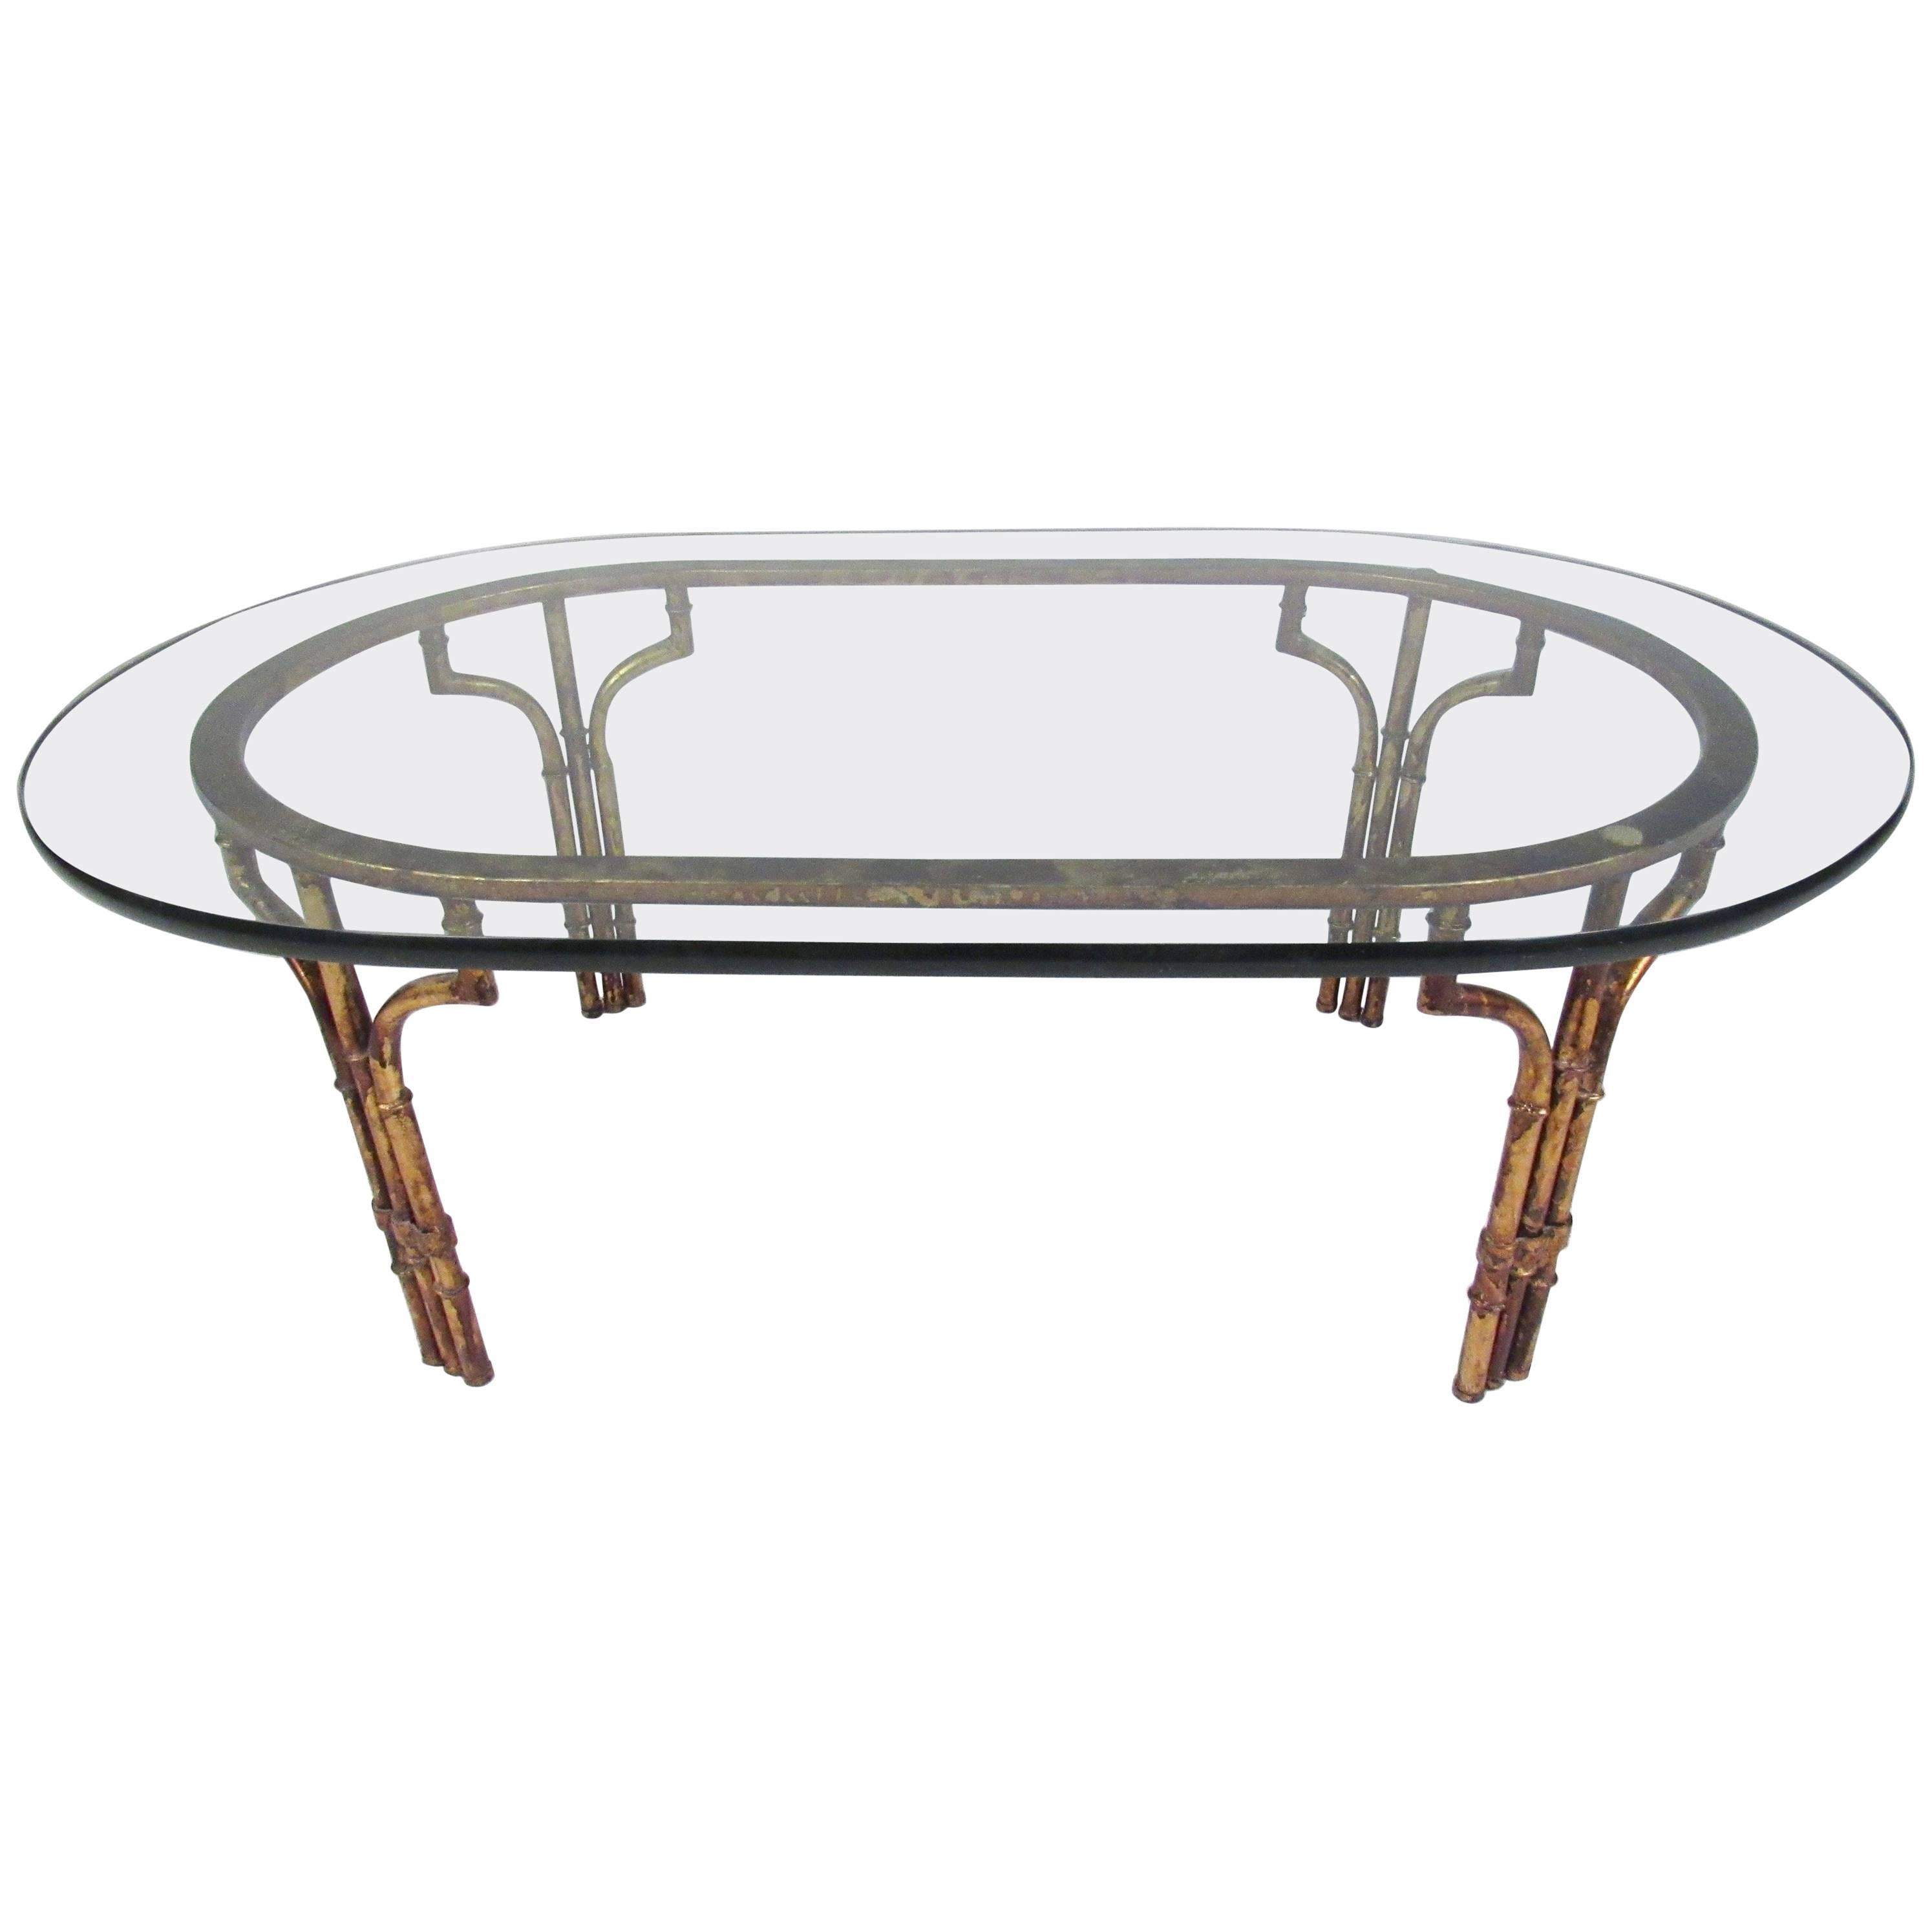 Decorator Style Faux Bamboo Oval Coffee Table